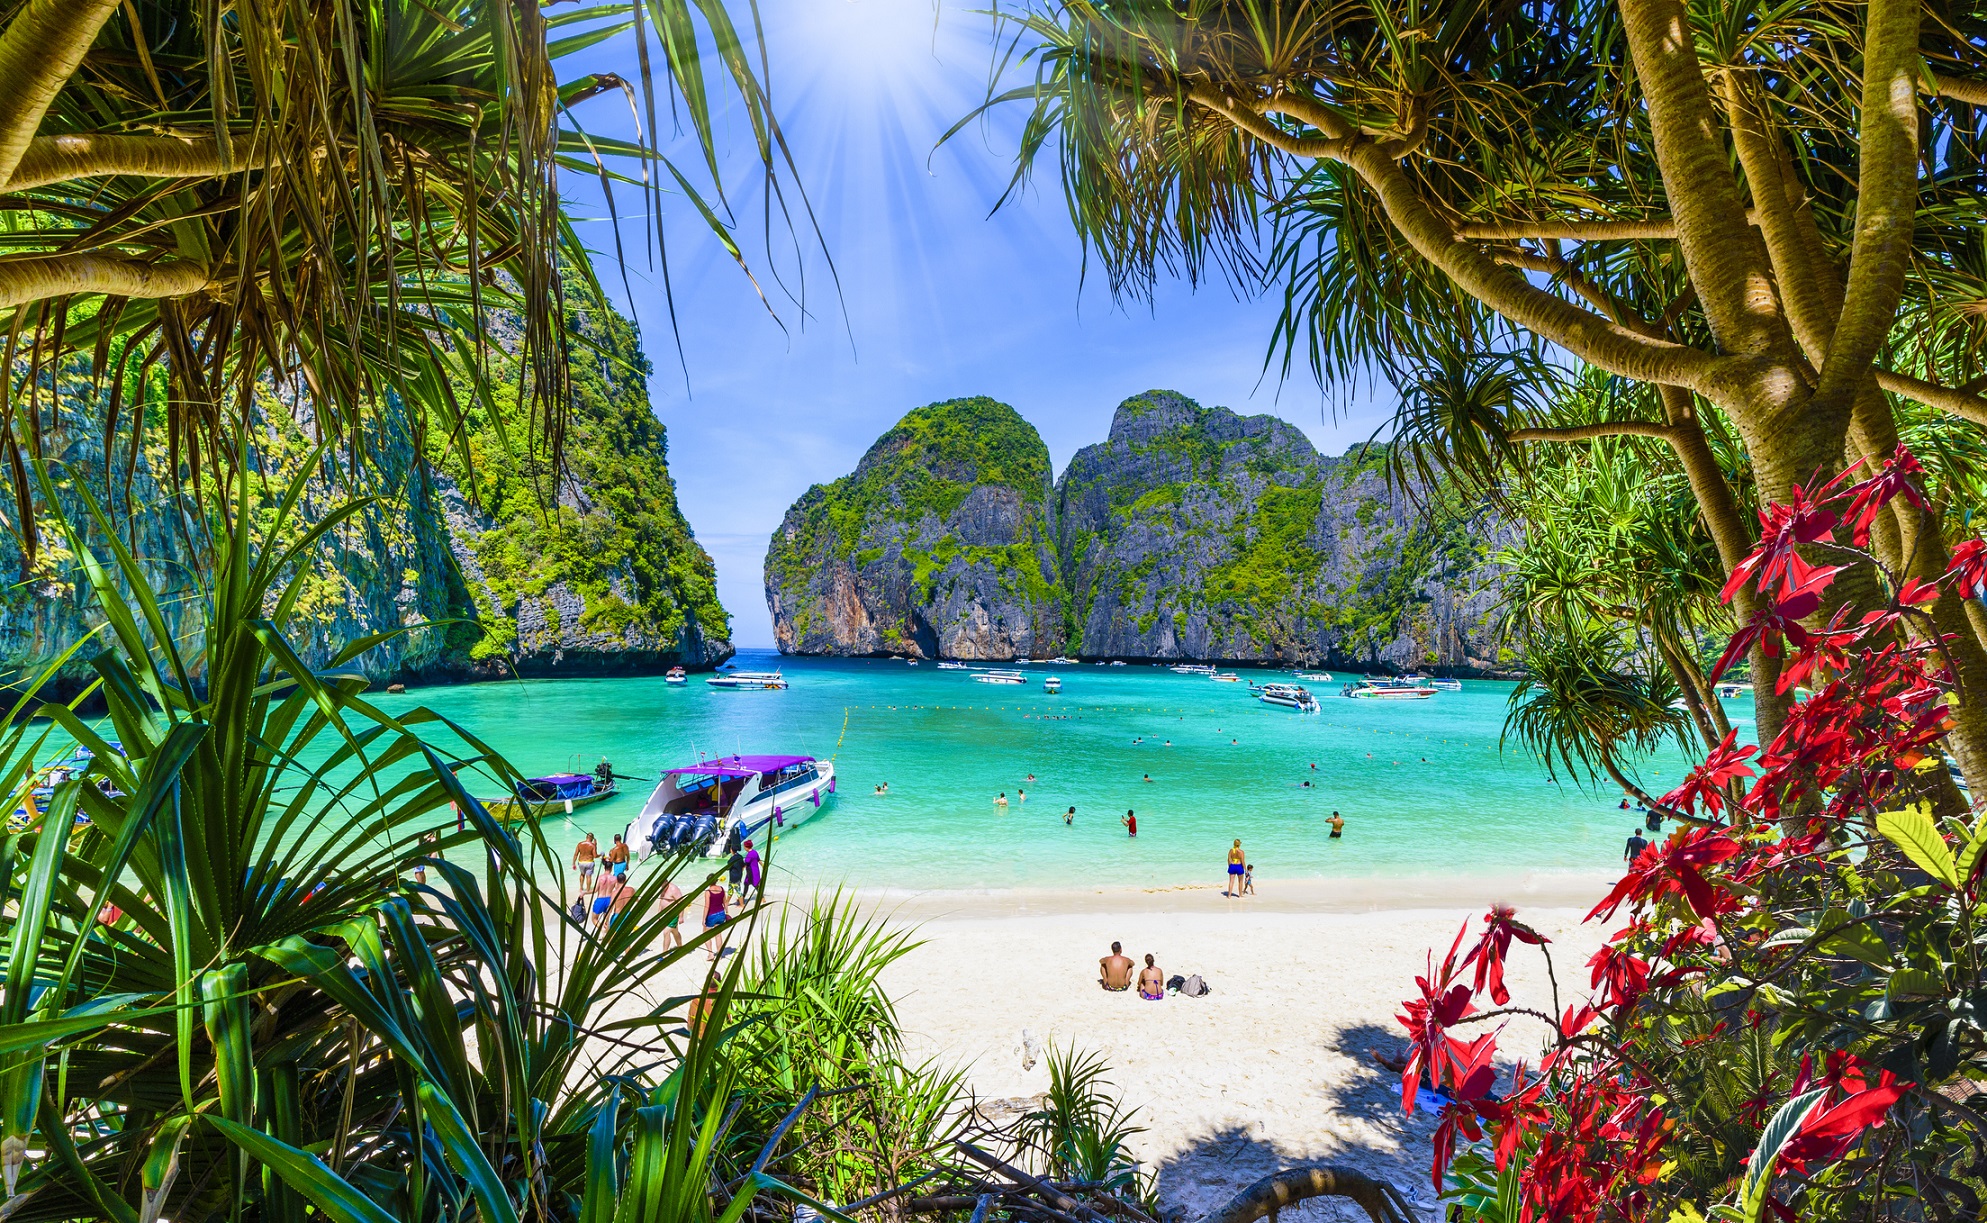 Picture perfect Phi Phi Islands and relaxing 5* Phuket!